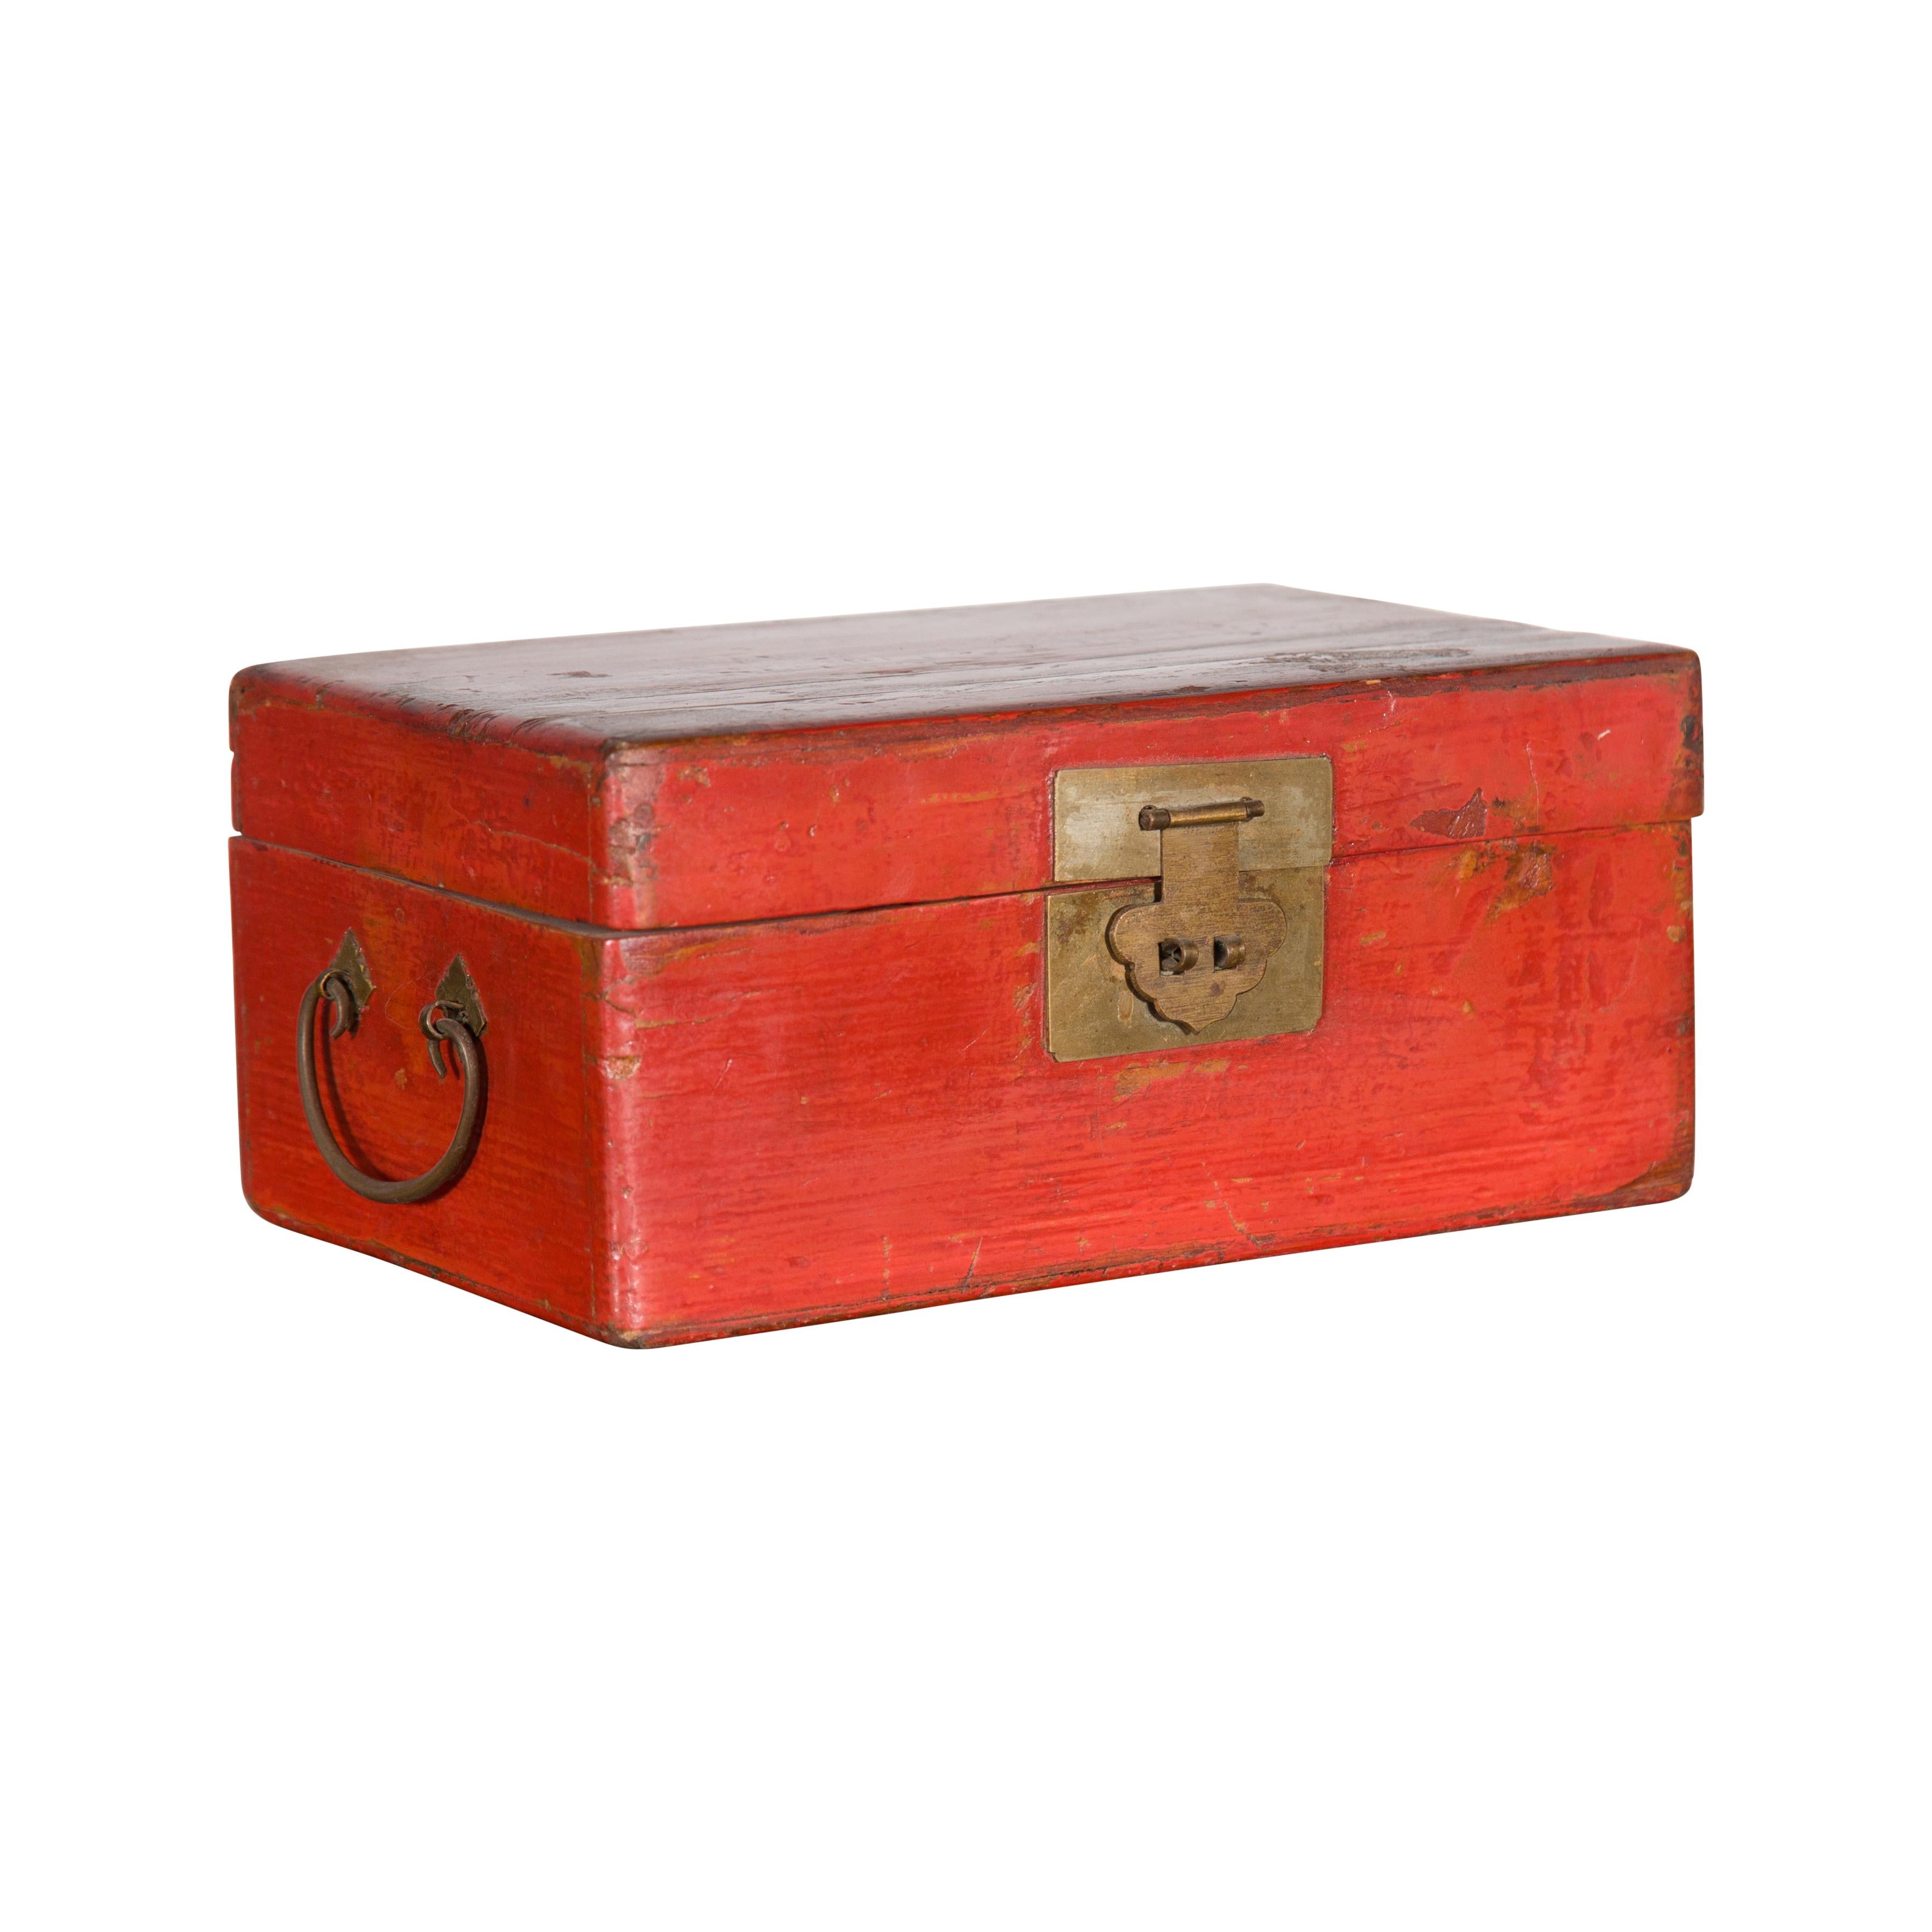 A vintage Chinese red lacquered document box from the mid 20th century, with brass hardware. Created in China during the midcentury period, this document box features a red lacquered lid opening thanks to a traditional lock to reveal a small